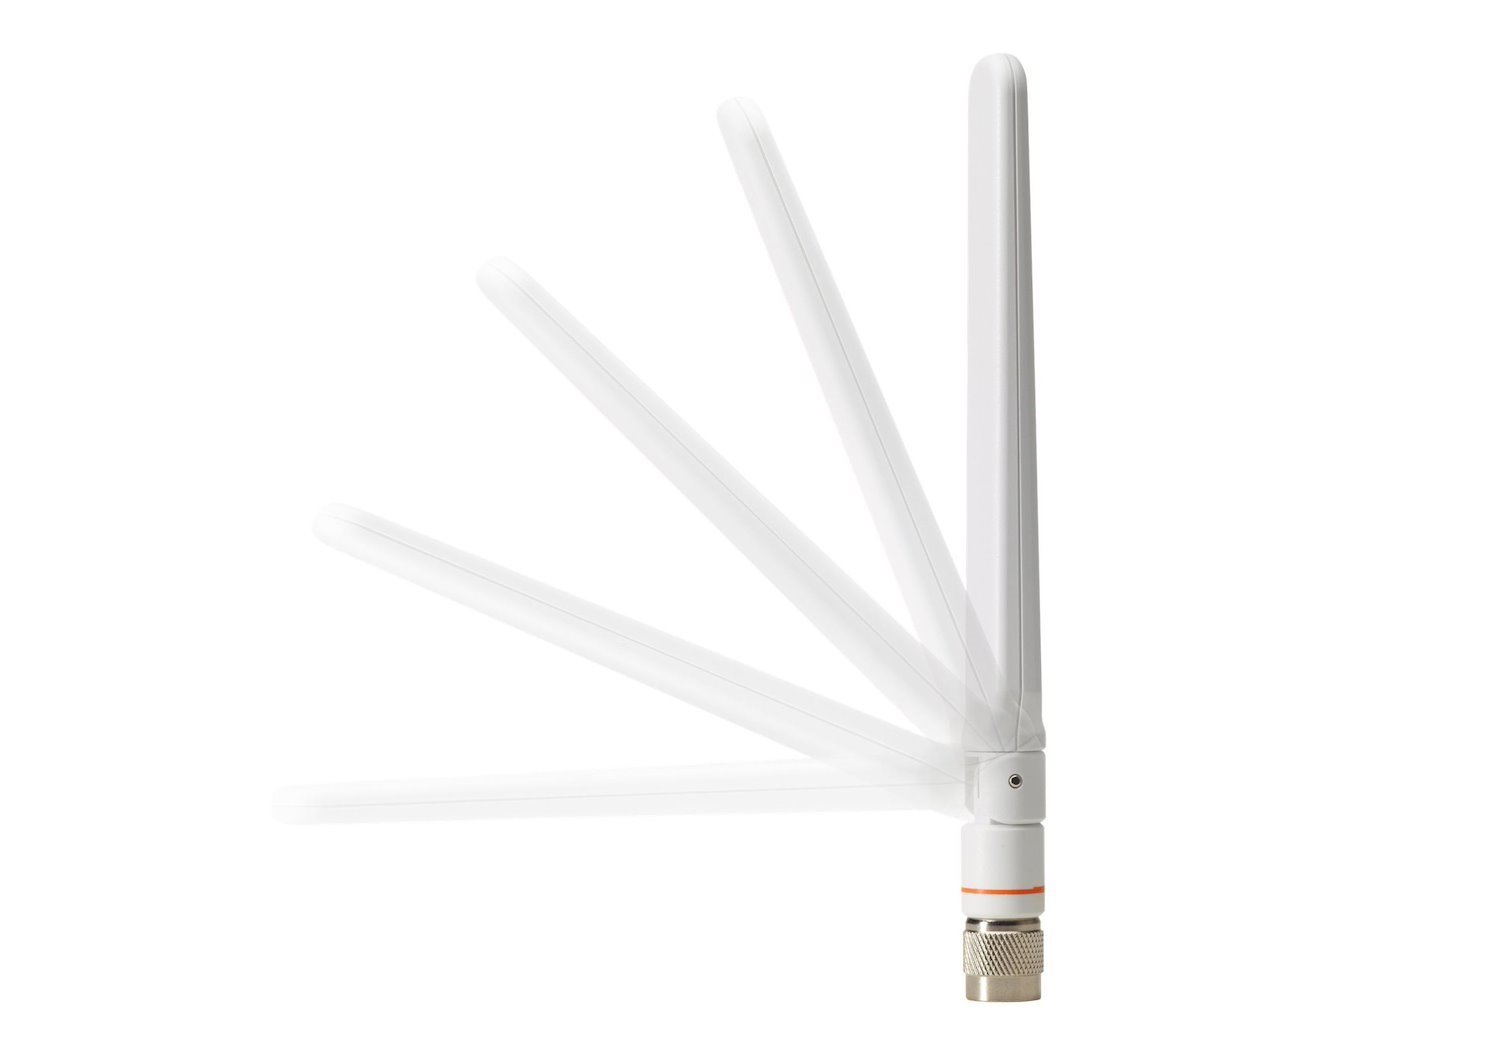 Cisco Antenna for Indoor, Wireless Access Point - White